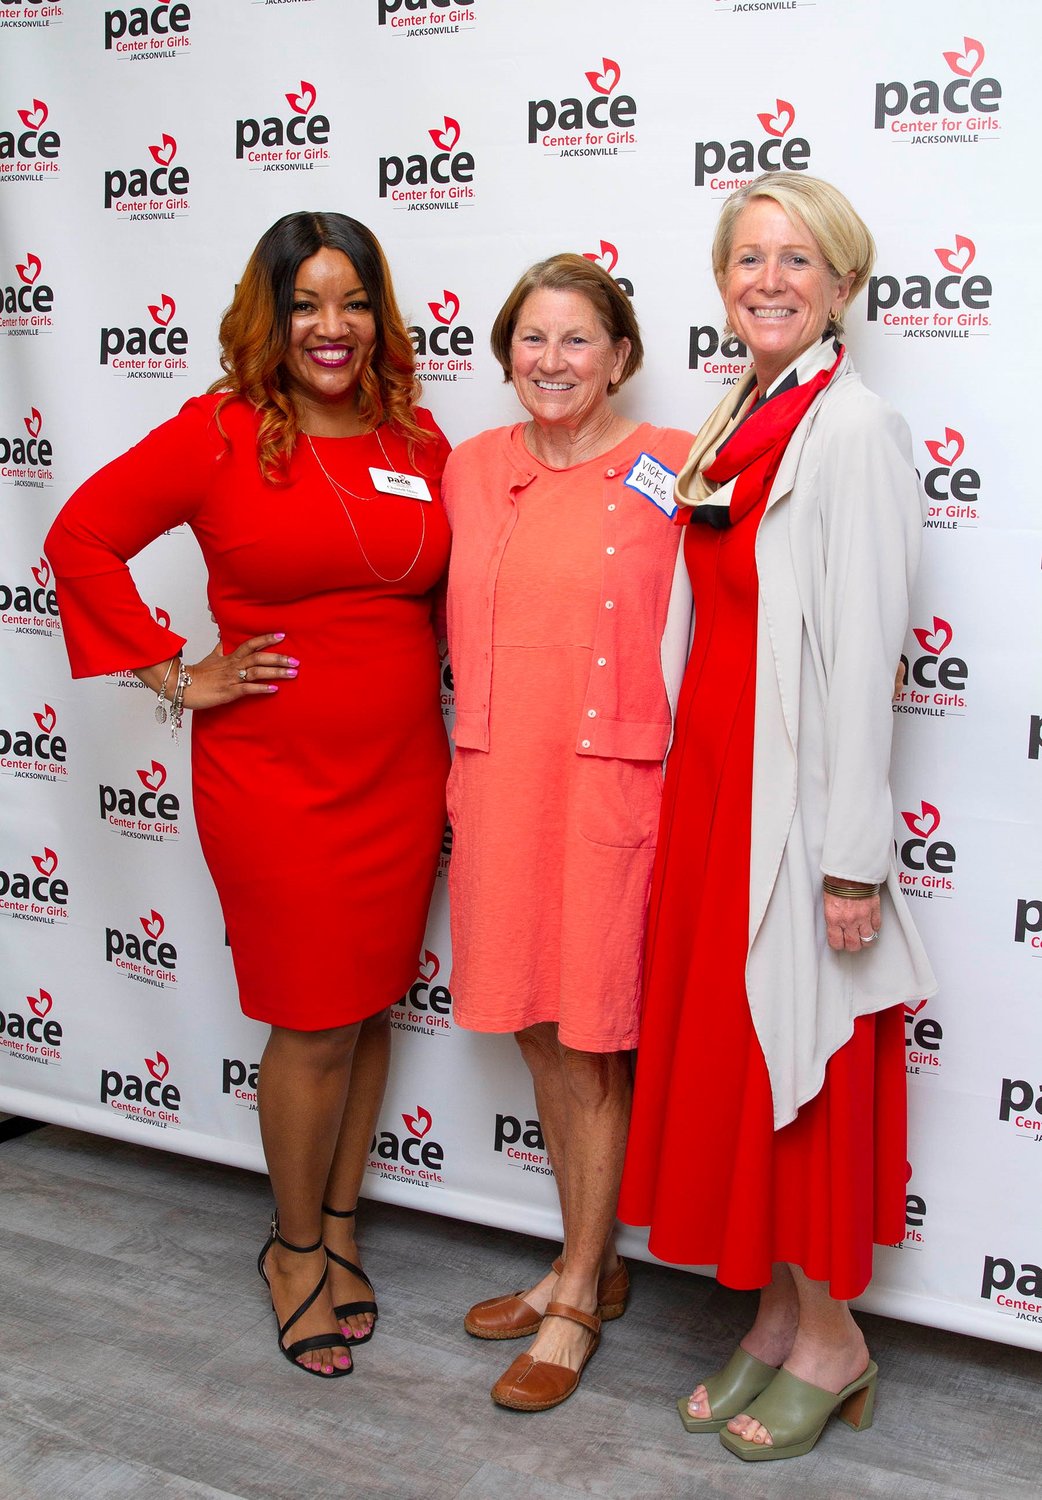 Pictured from left:  Chantell Miles, executive director of Pace Jacksonville; Vicki Burke, founder of Pace Center for Girls; and Mary Marx, president and CEO of Pace Center for Girls.